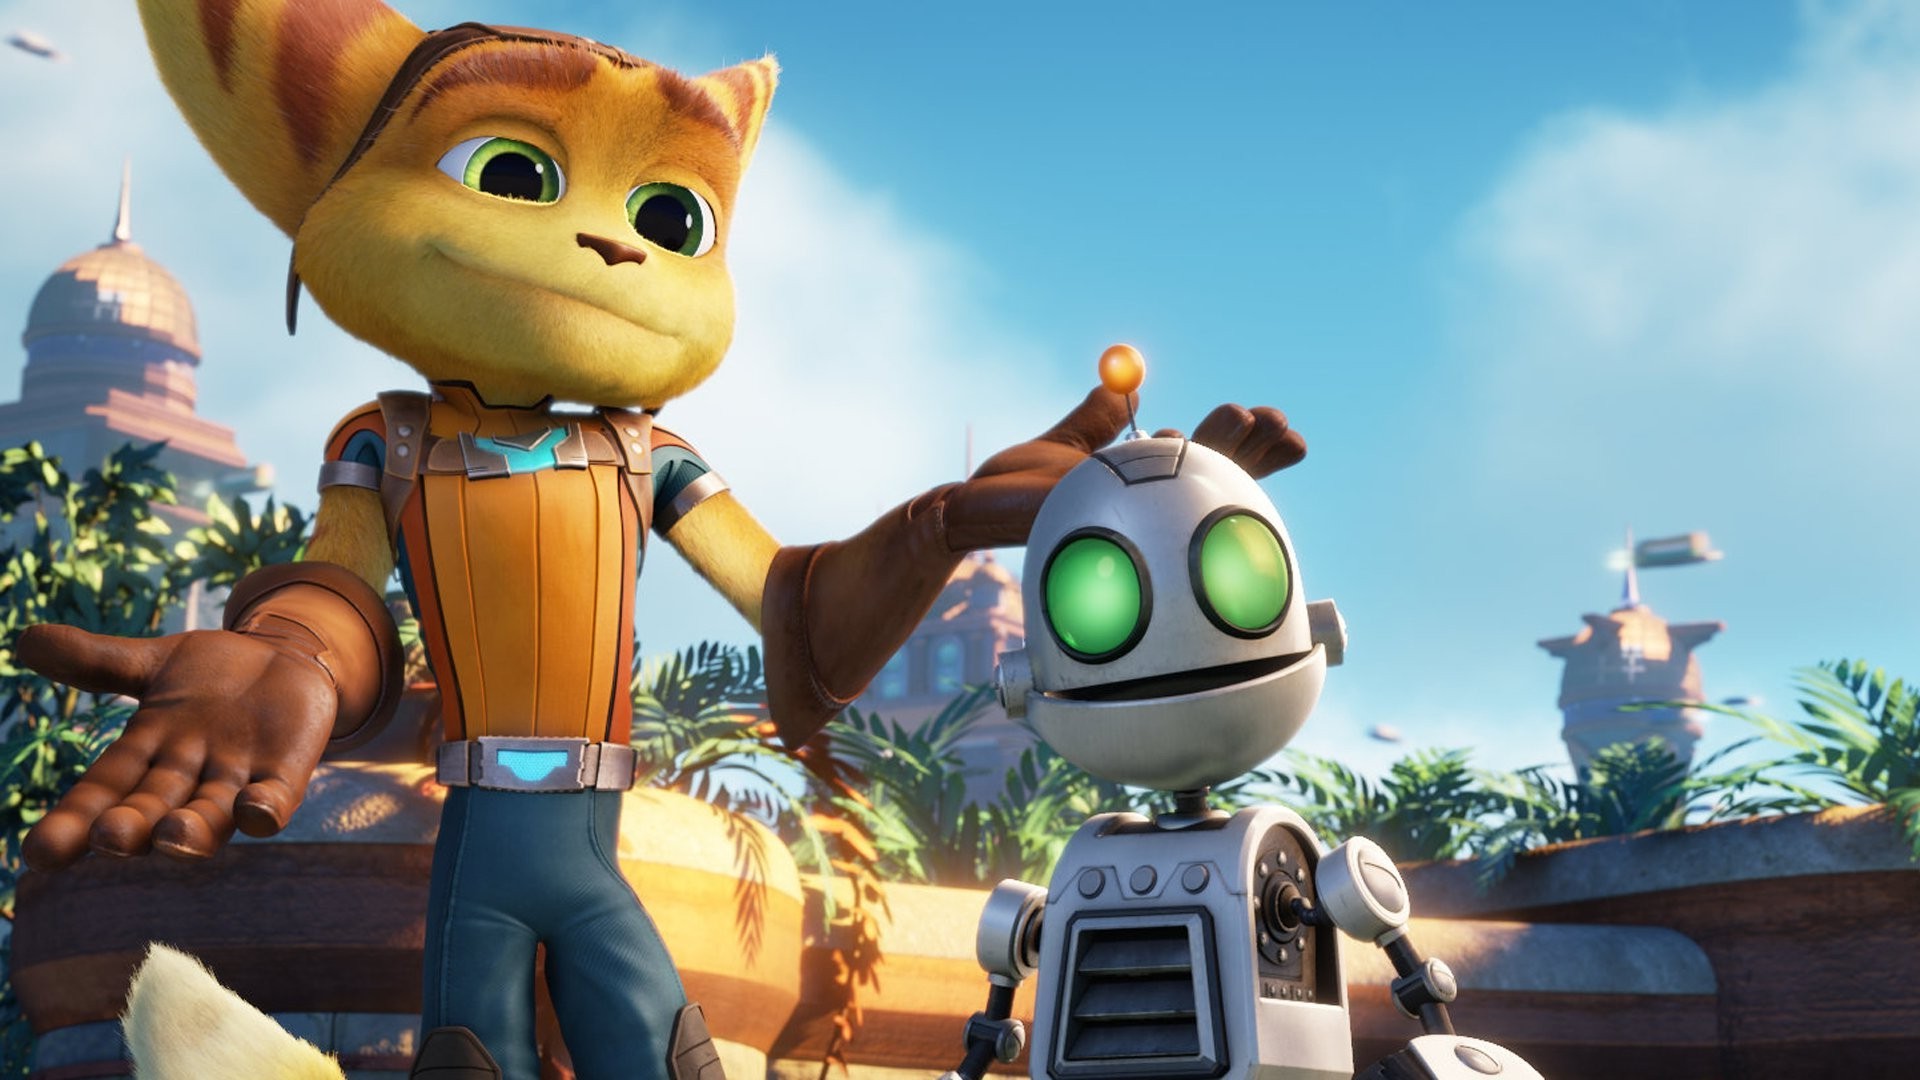 Ratchet And Clank, Ratchet And Clank (movie) Wallpaper